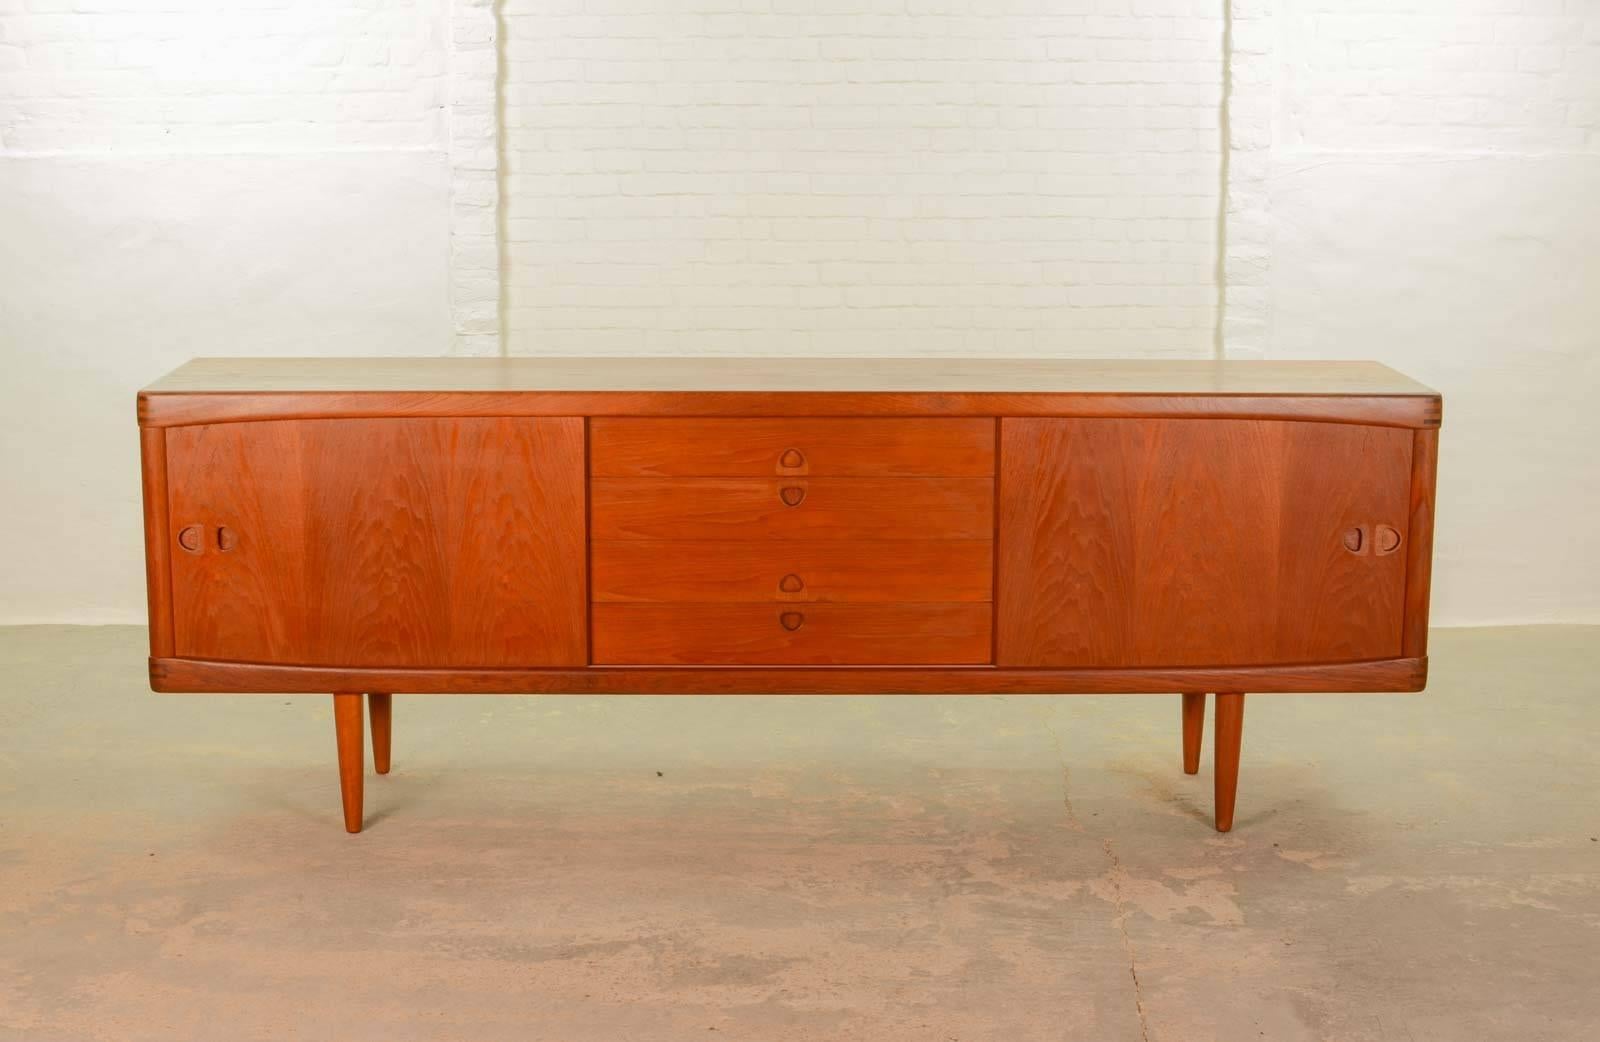 This beautiful large high quality finished Danish sideboard or credenza is designed by H.W. Klein for Bramin in the 1960s. It features on both sides two identical sliding doors with four drawers in between. All with nicely shaped subtle detailed